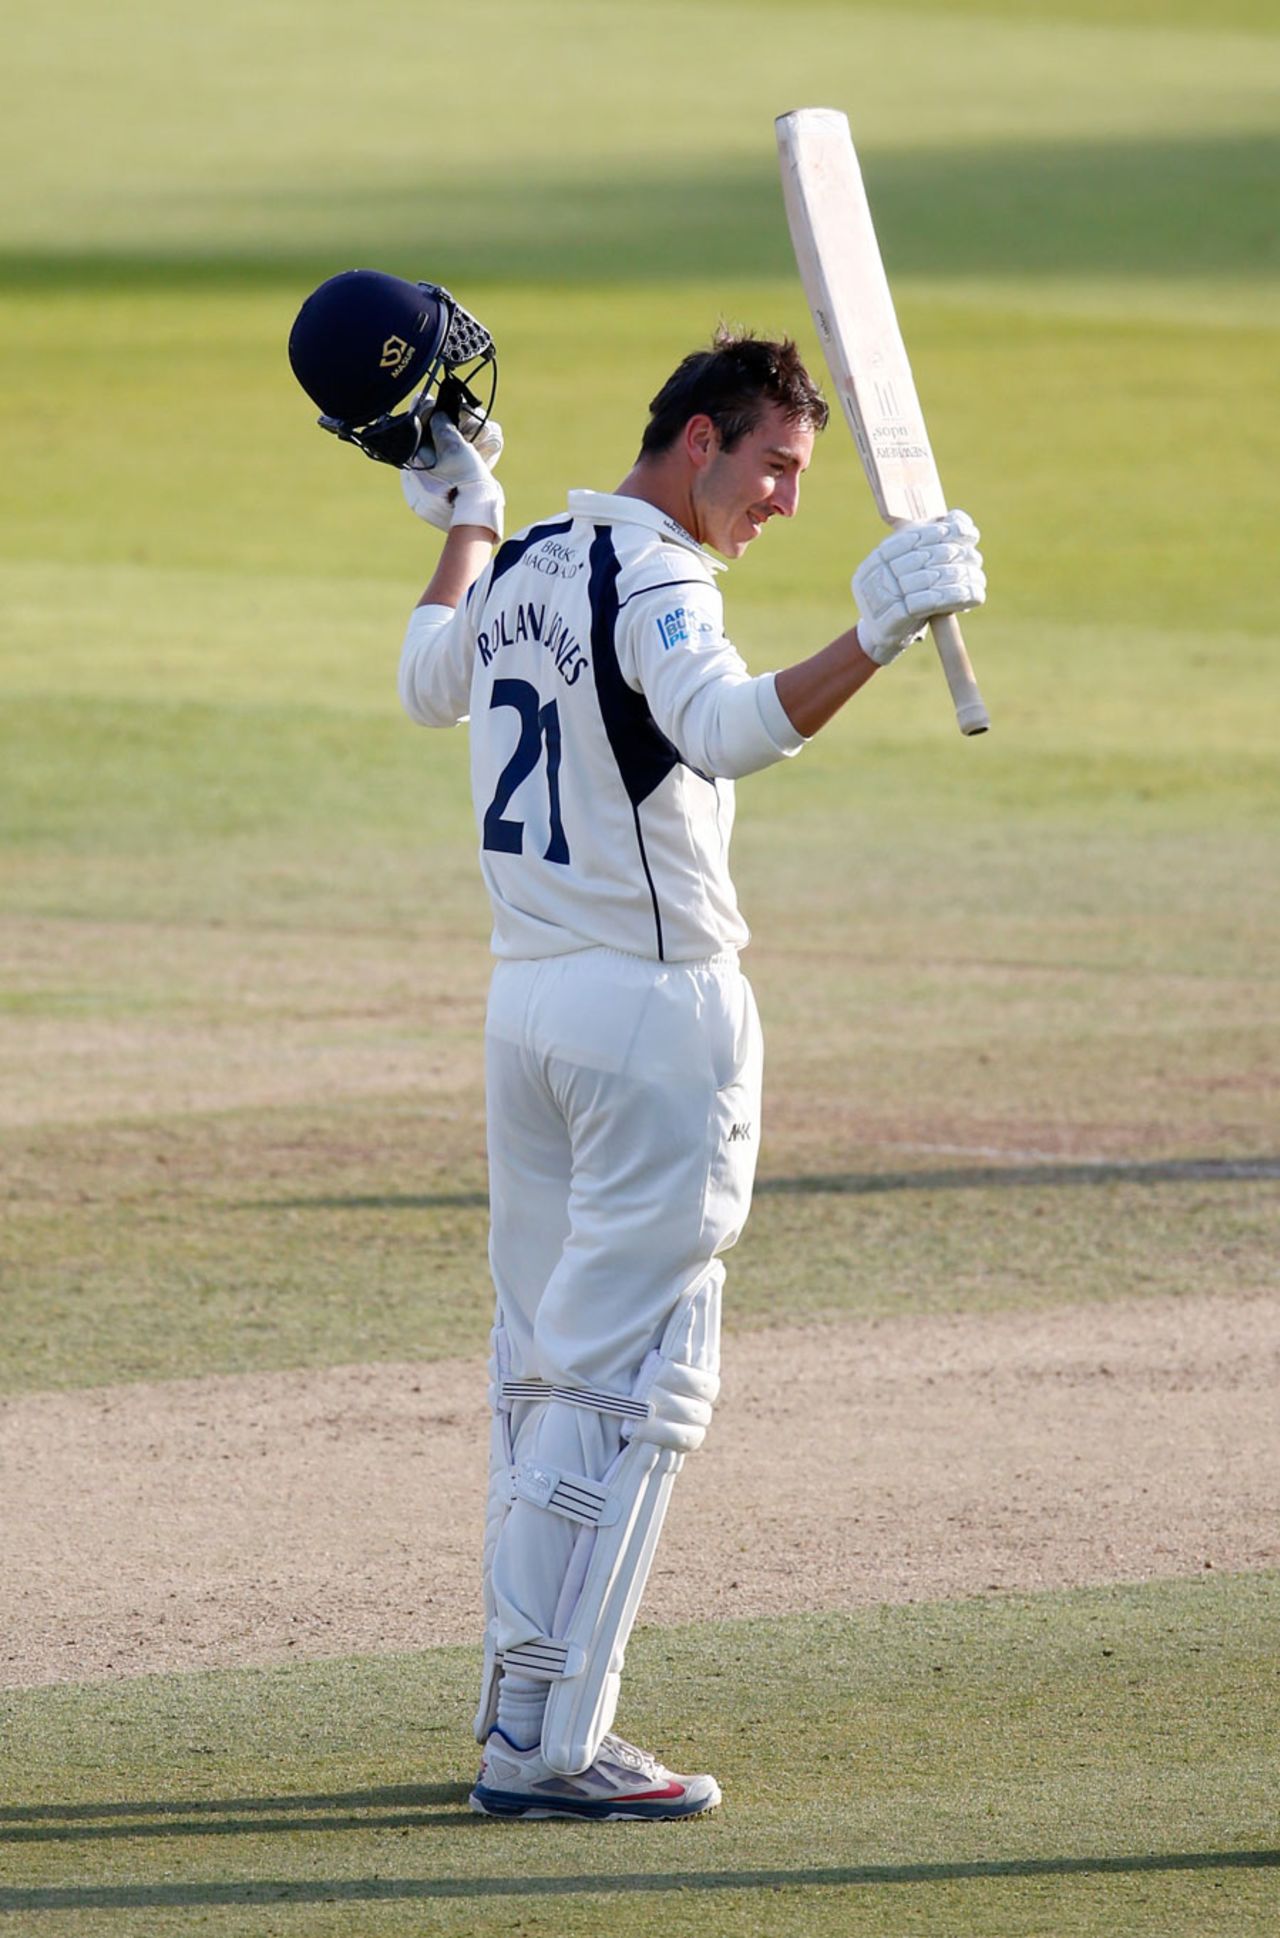 Toby Roland-Jones smashed his way to a maiden hundred, Middlesex v Yorkshire, County Championship, Division One, Lord's, 3rd day, September 11, 2015